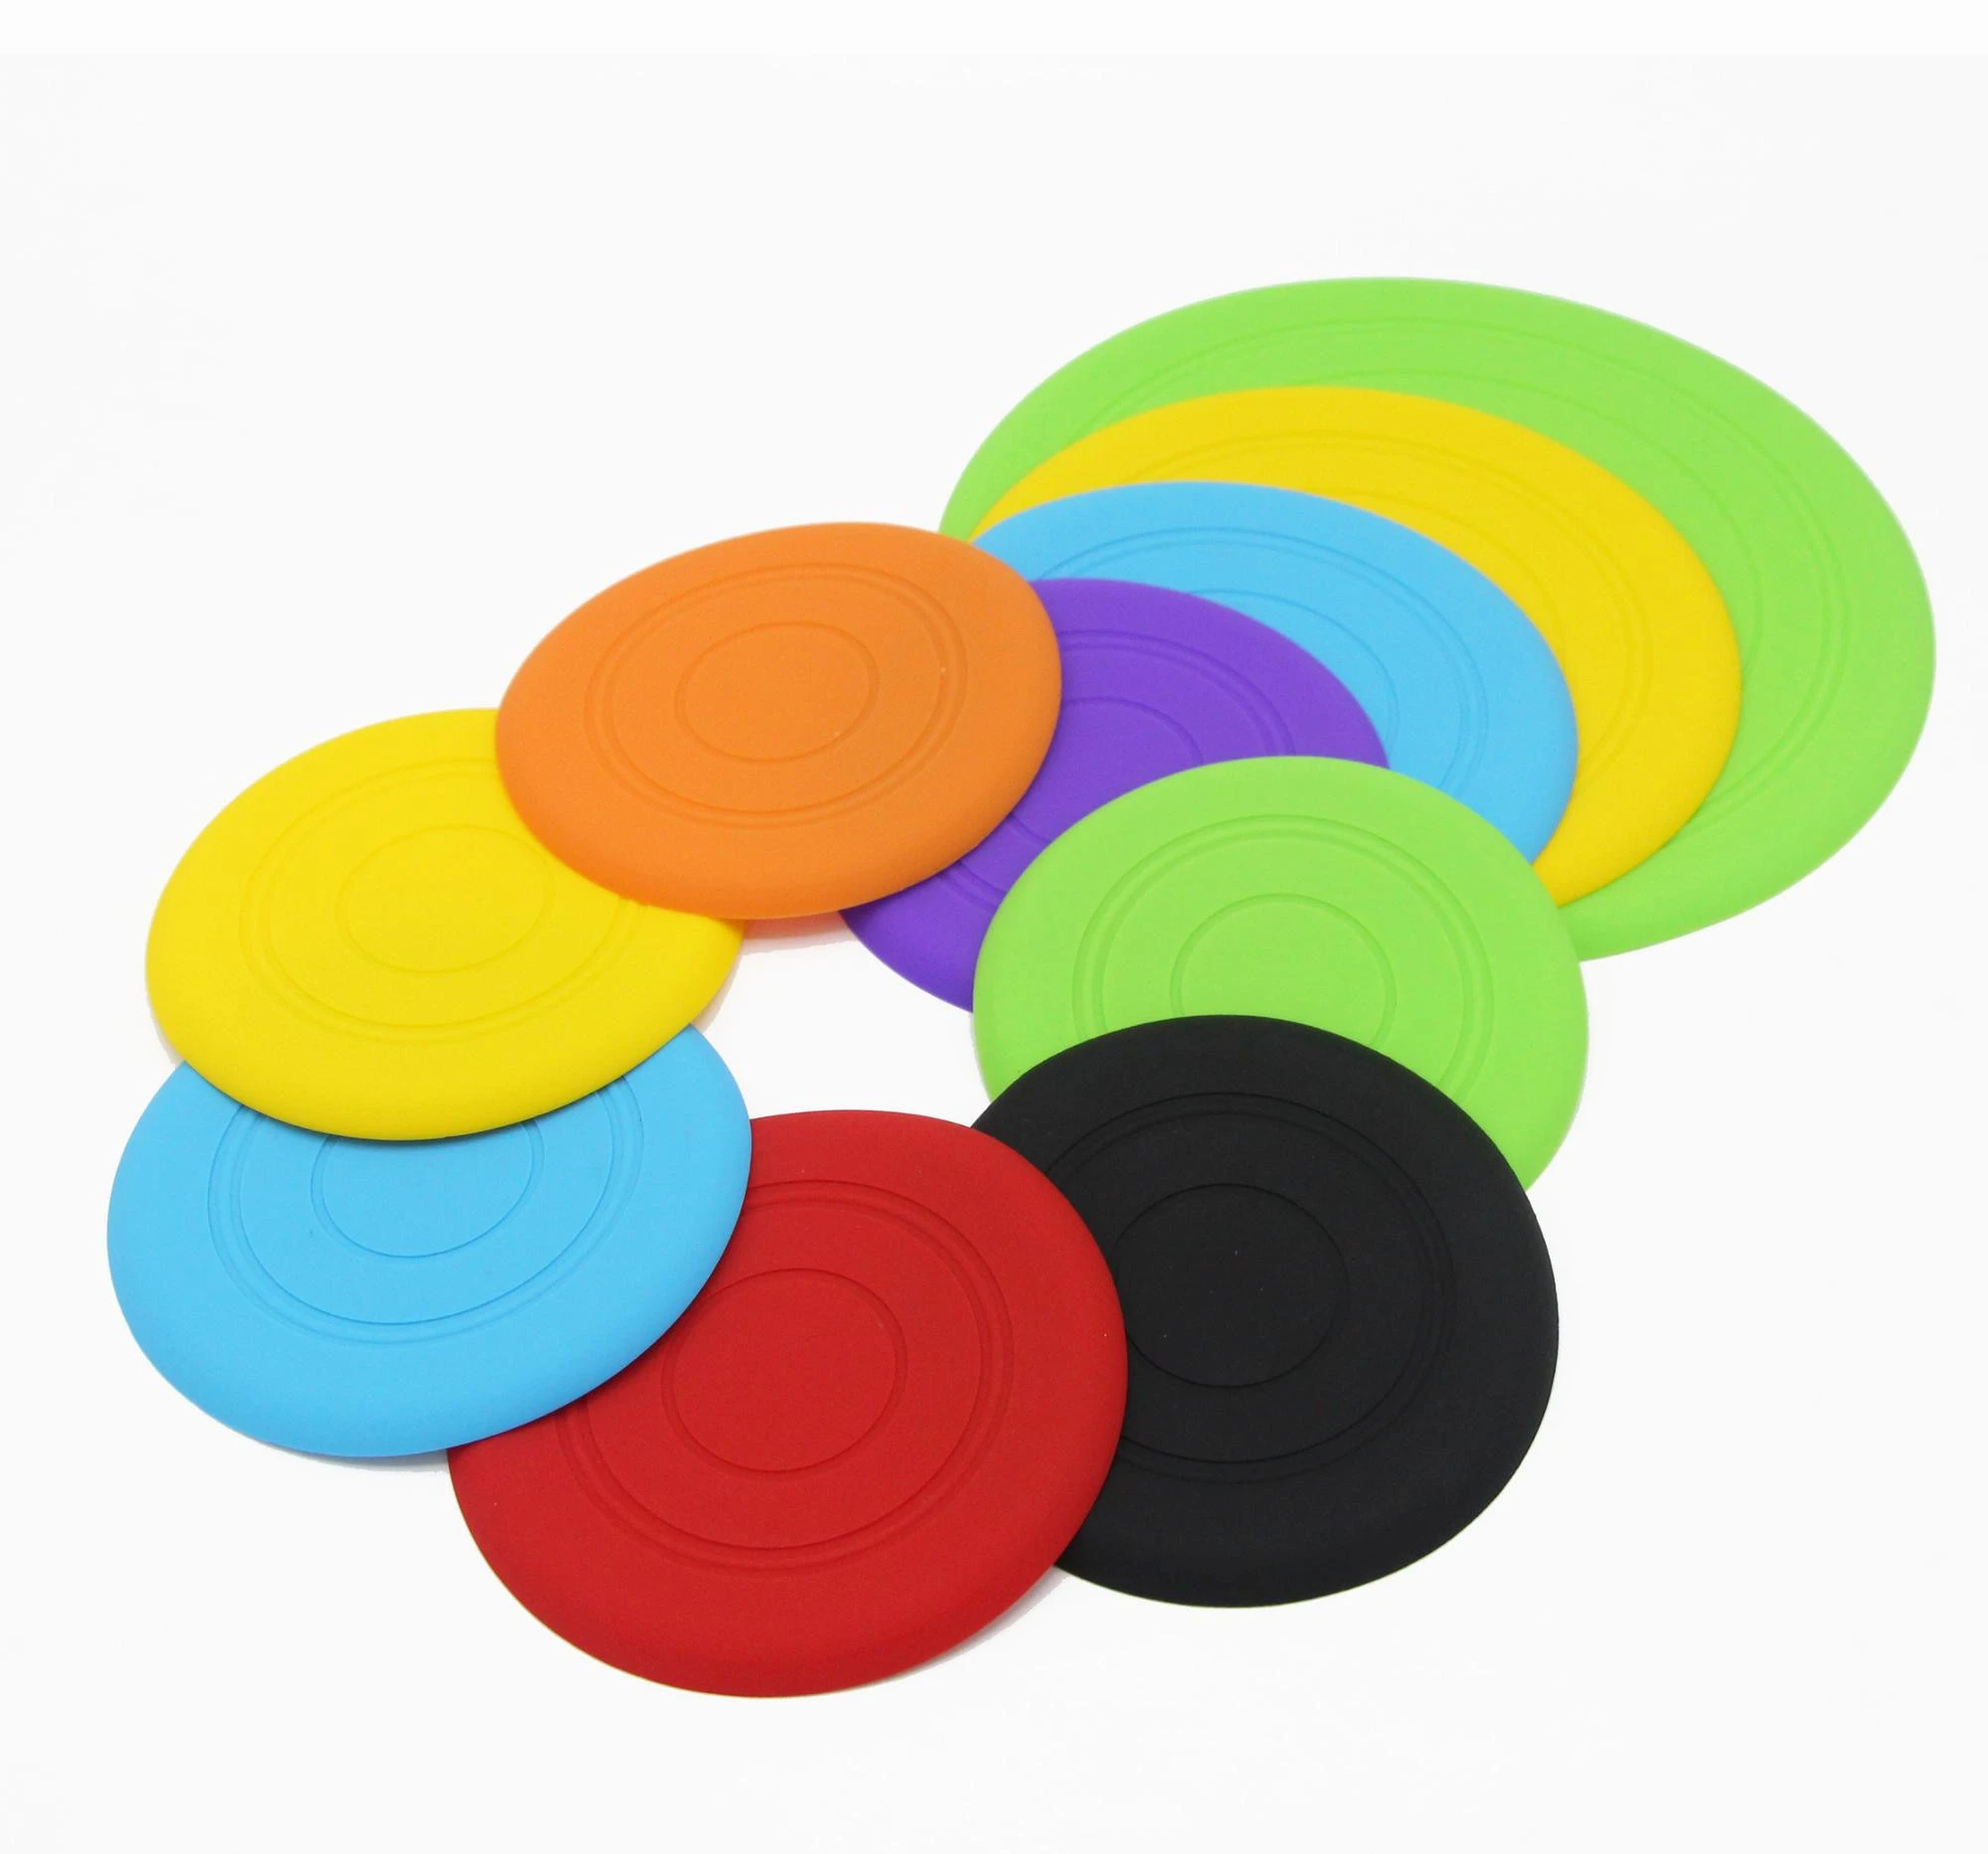 Dog Silicone Flyer Dog Flying Disk Pet Toys for Outdoor Indoor Training 7 Inch Large 6 Pack Multiple Colors Flying Disk